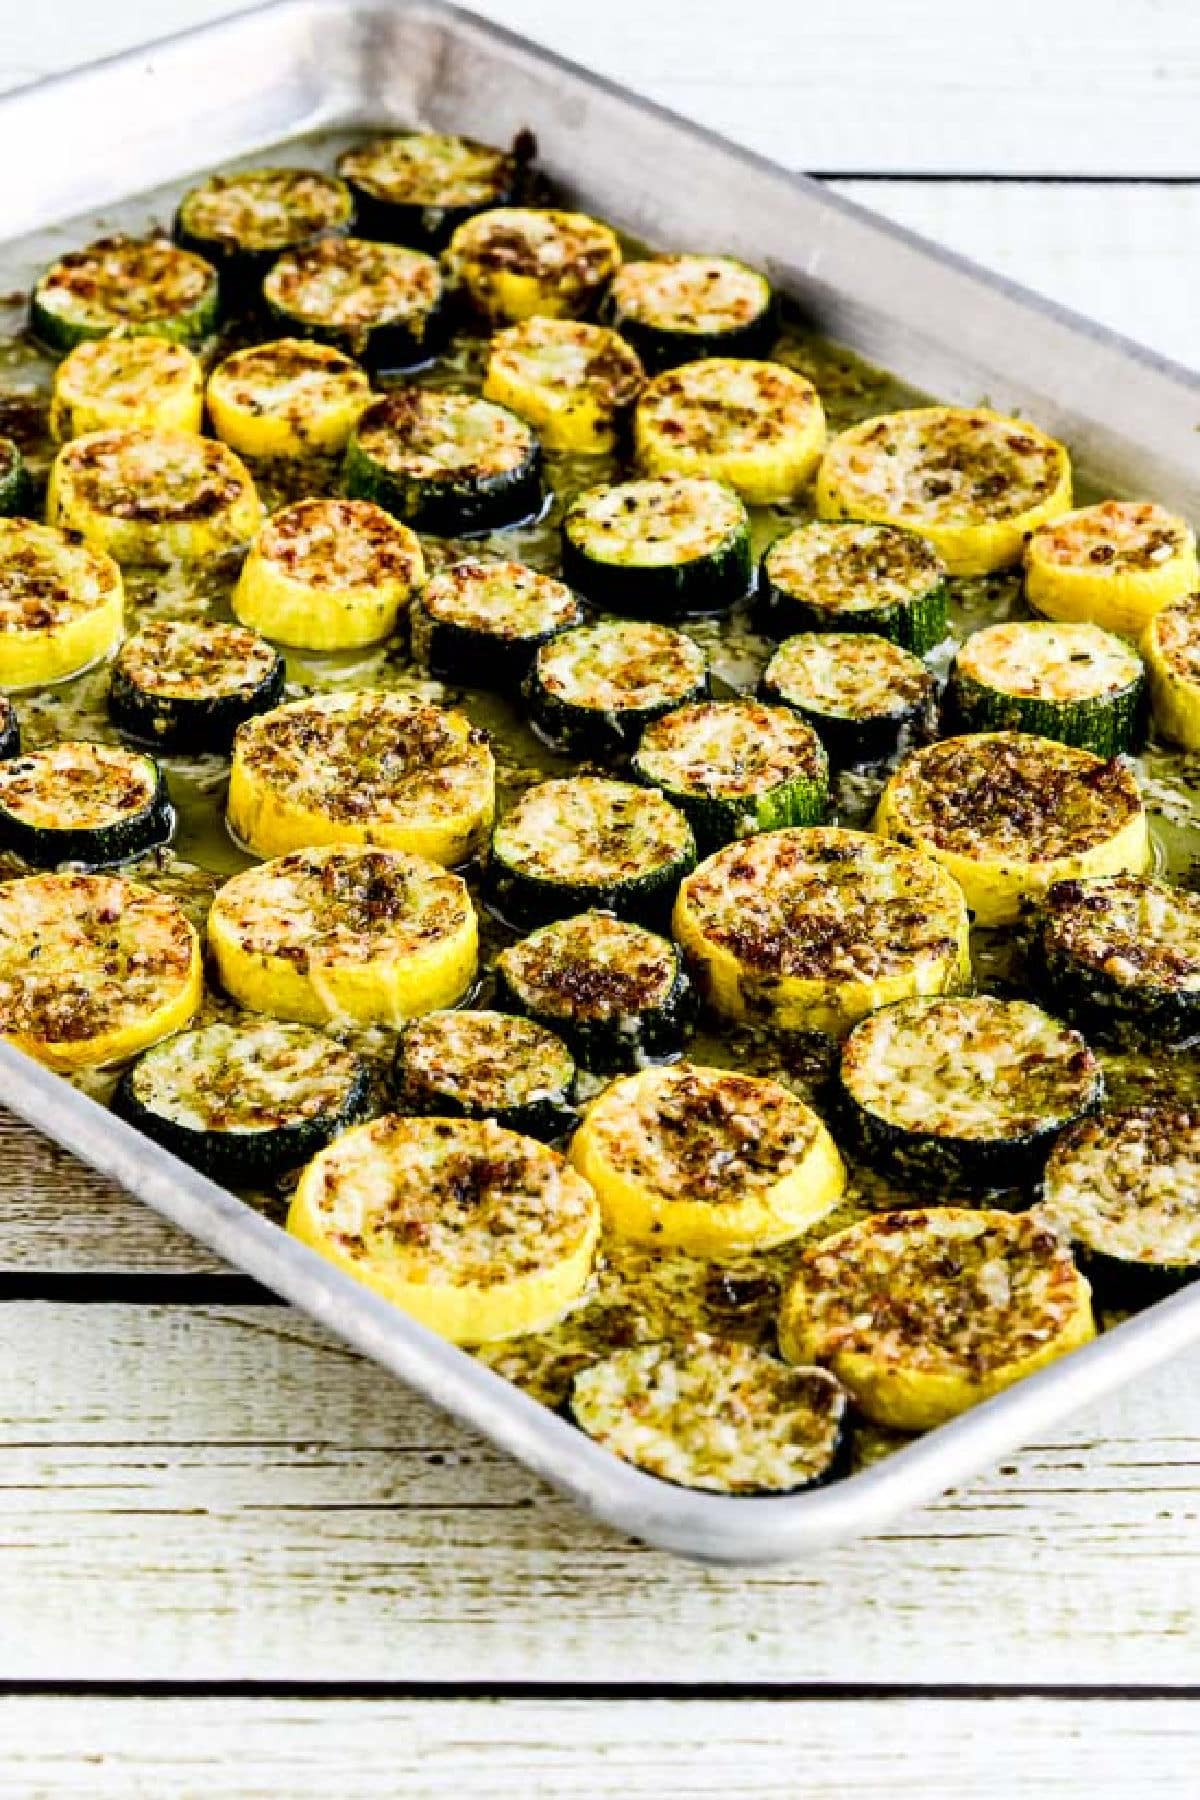 Summer Squash with Pesto and Parmesan on baking sheet on wooden background